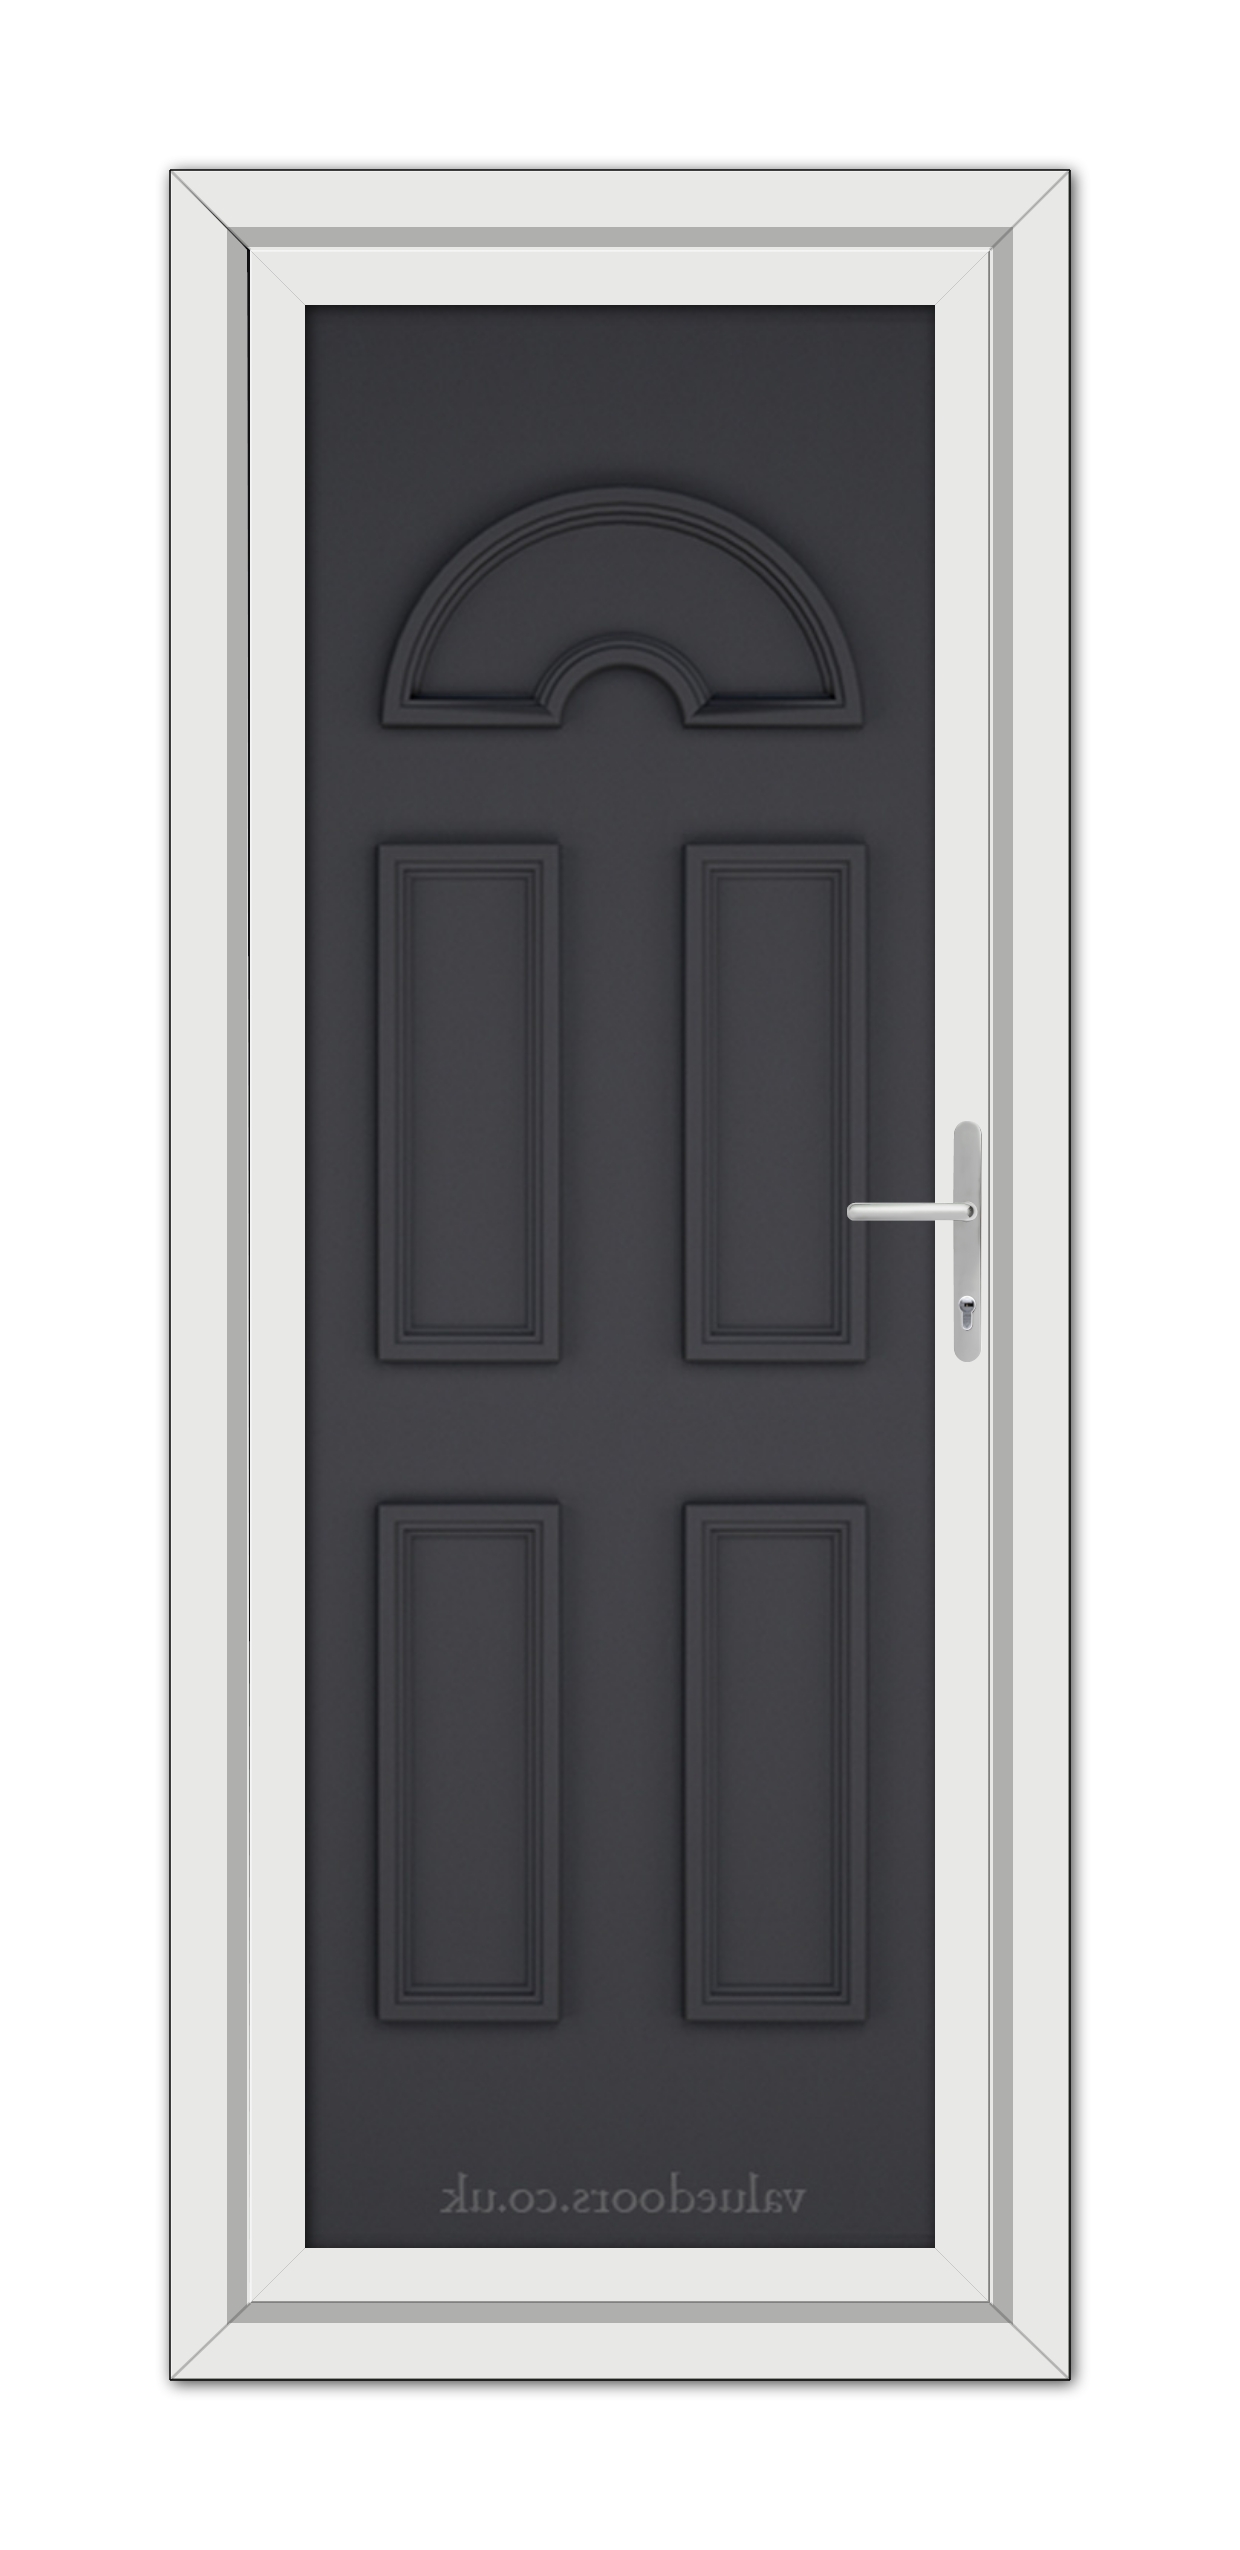 A vertical image of a Grey Sandringham Solid uPVC Door with an arched top and six panels, framed in white with a silver handle on the right side.